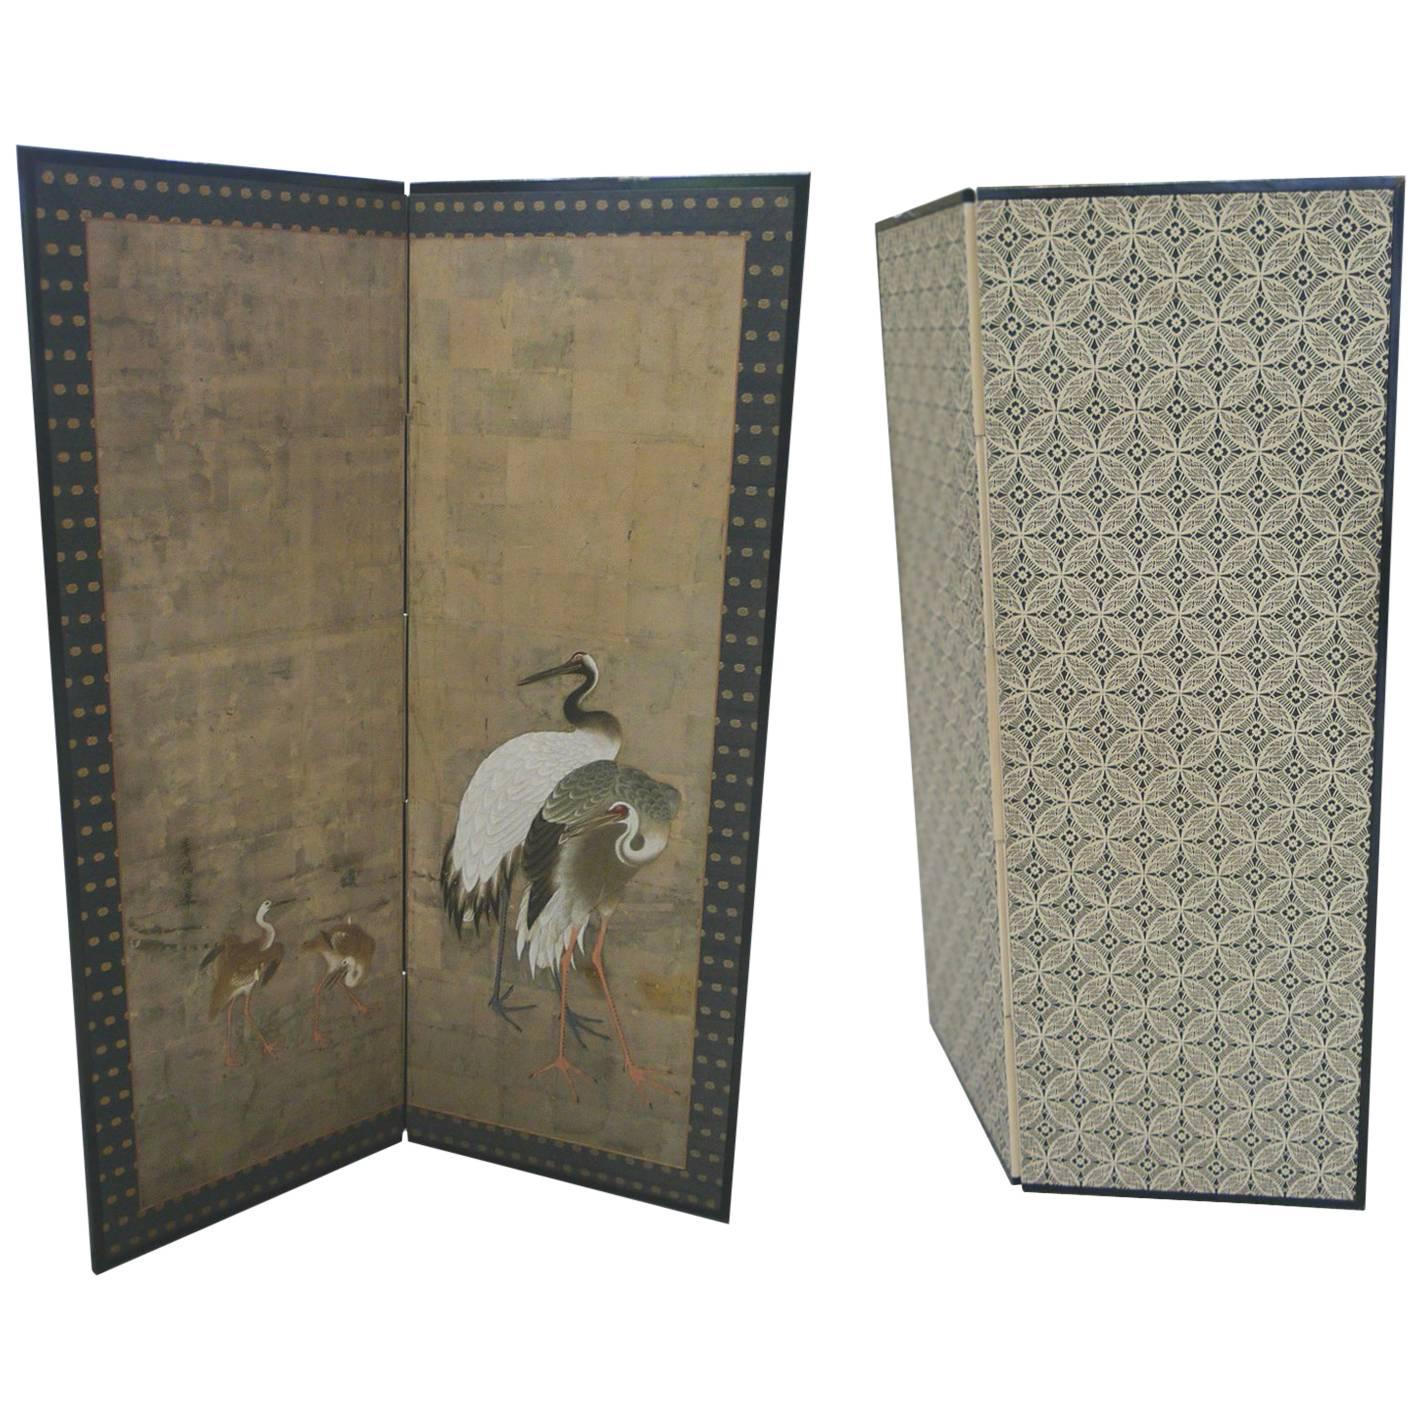 Antique Japanese Four-Panel Folding Screen with Hand-Painted Cranes